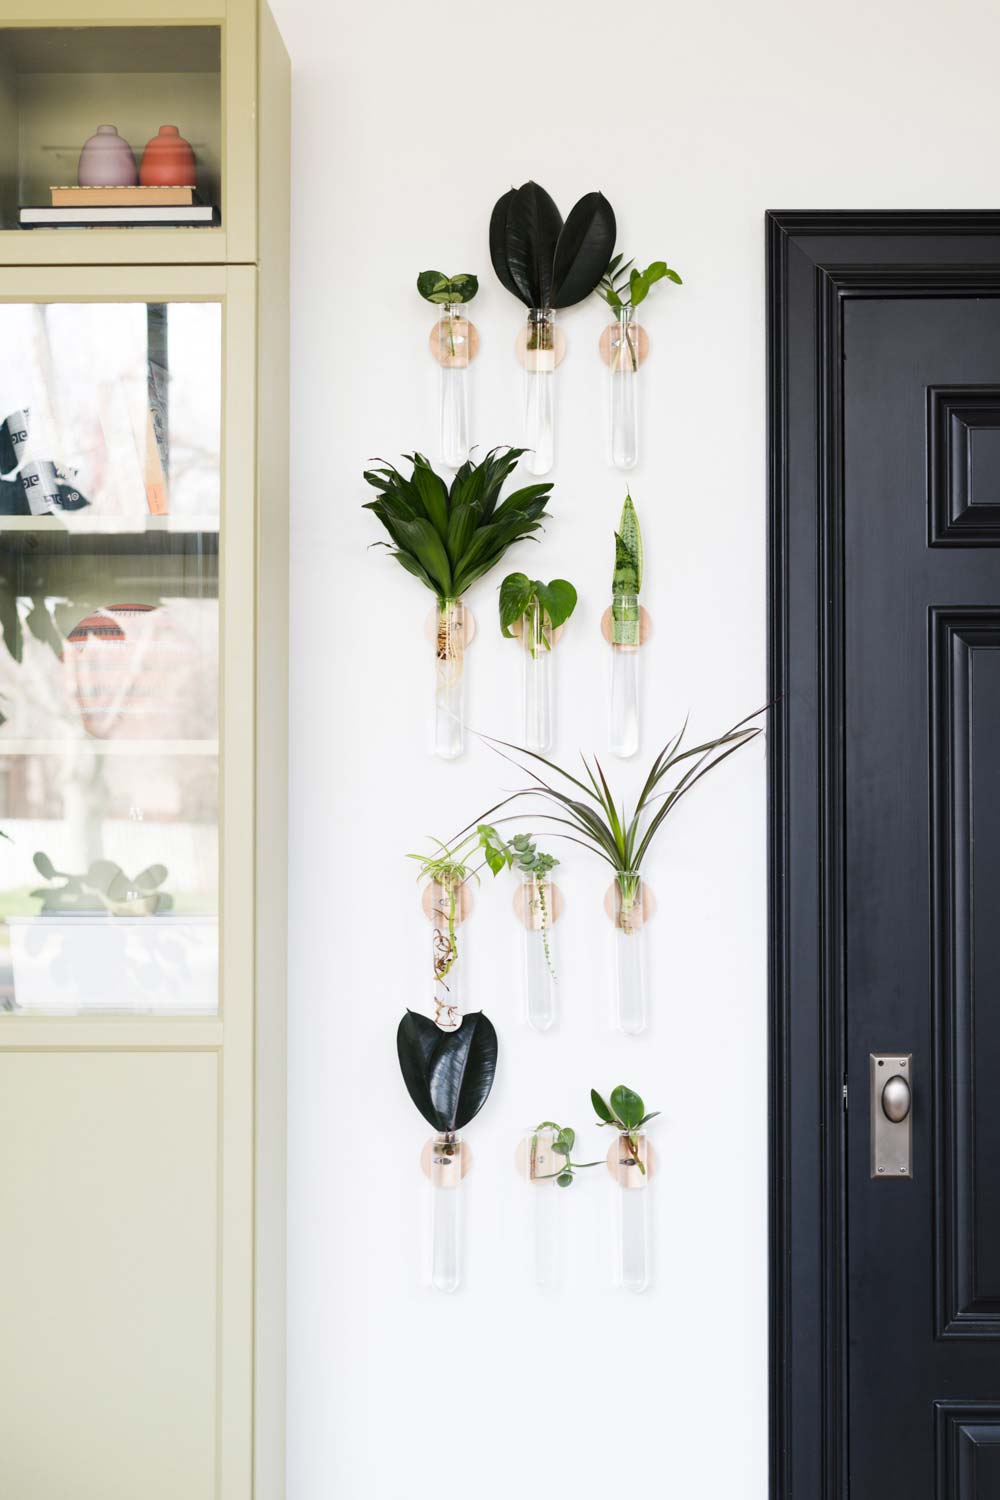 Wood and glass test tube planters hung on wall